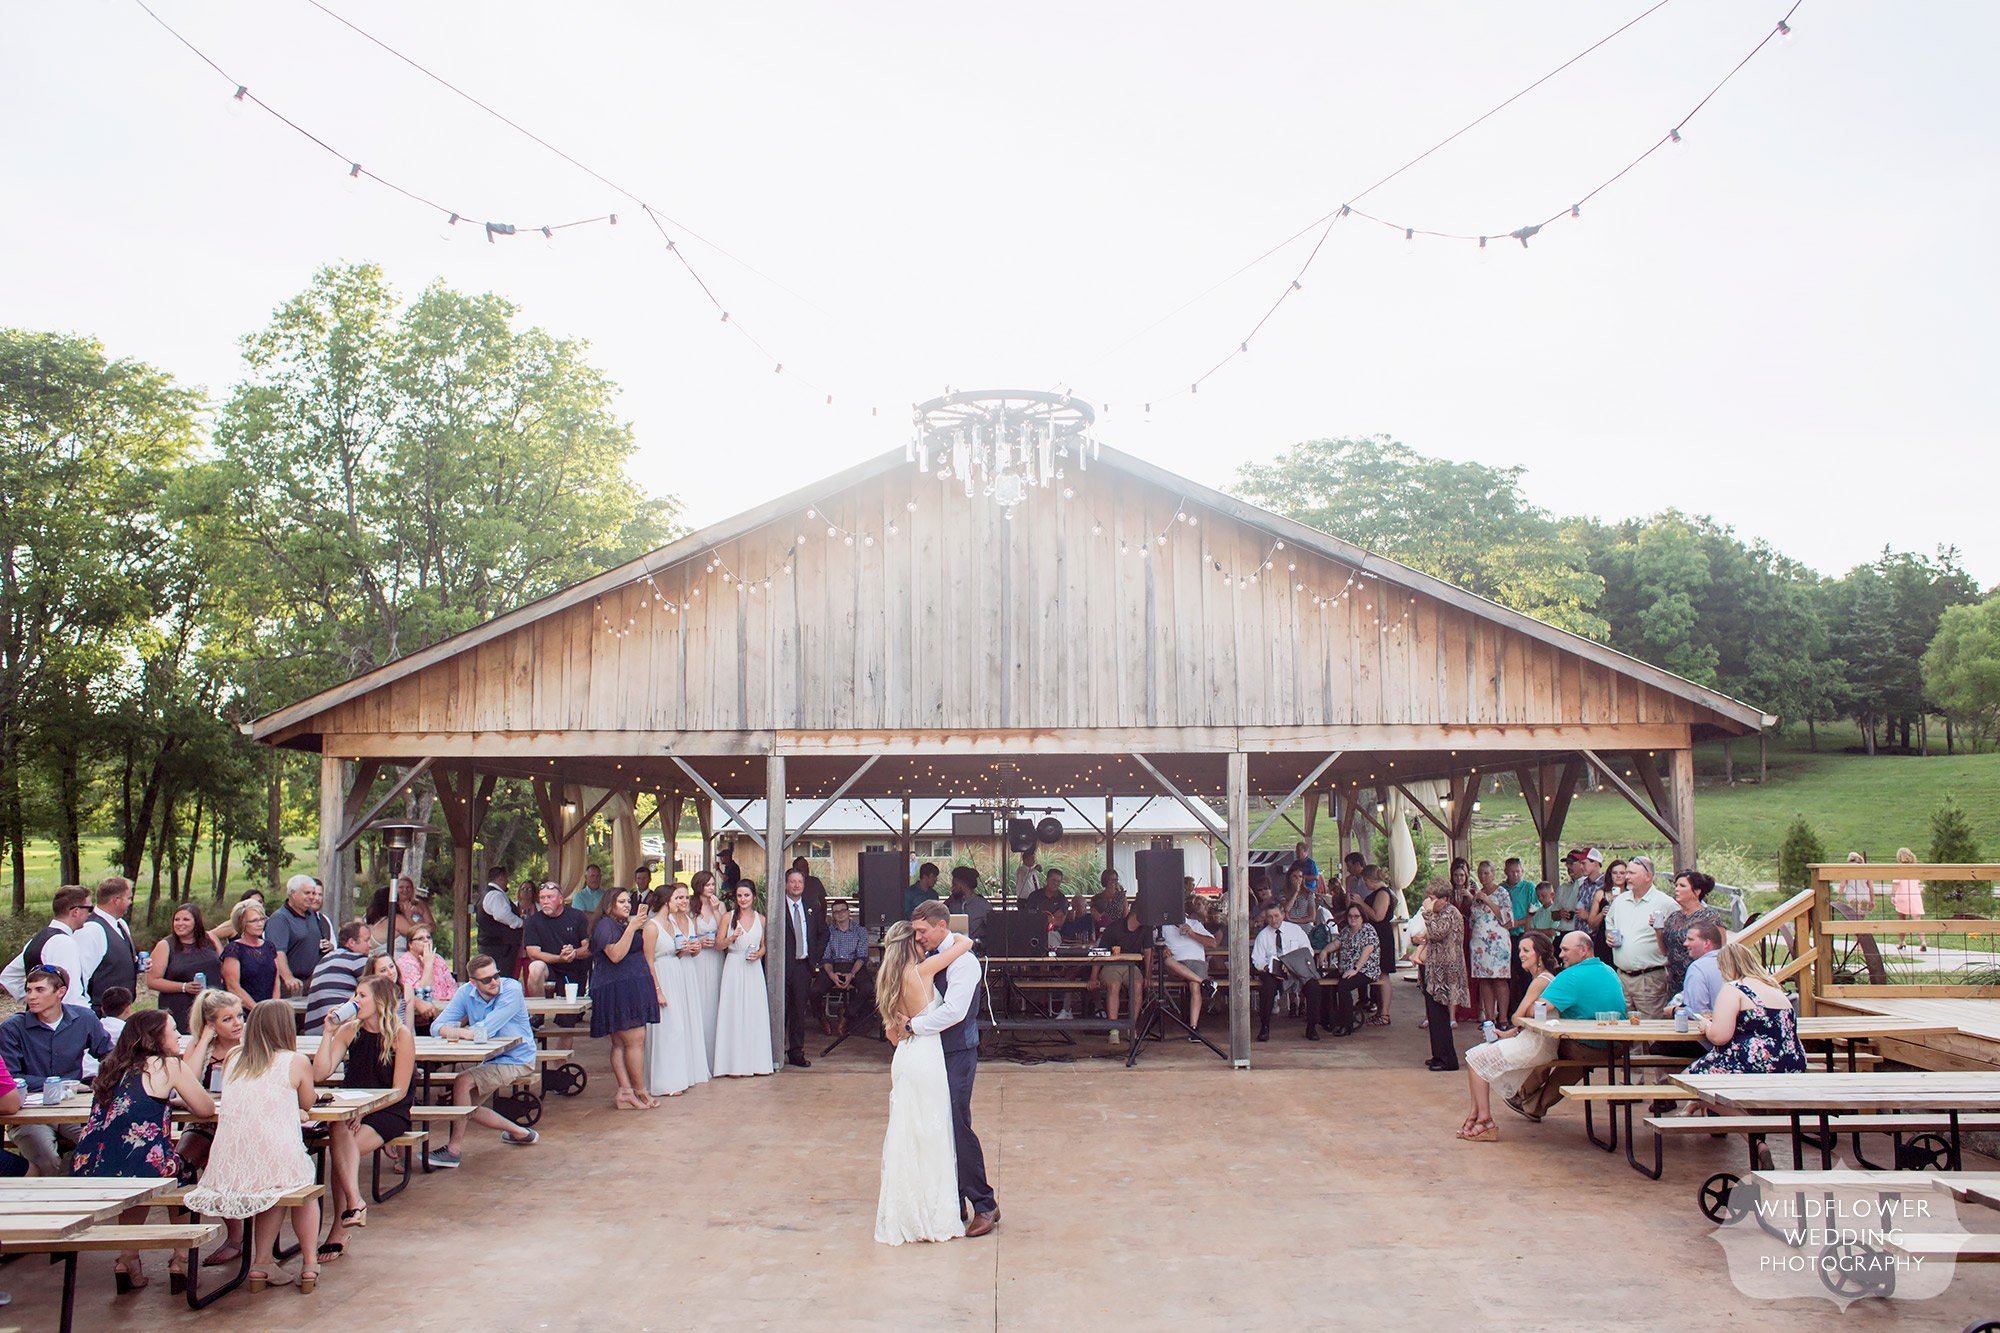 The bride and groom have their first dance outside under a canopy of twinkle lights at this barn wedding venue in Westphalia, MO.